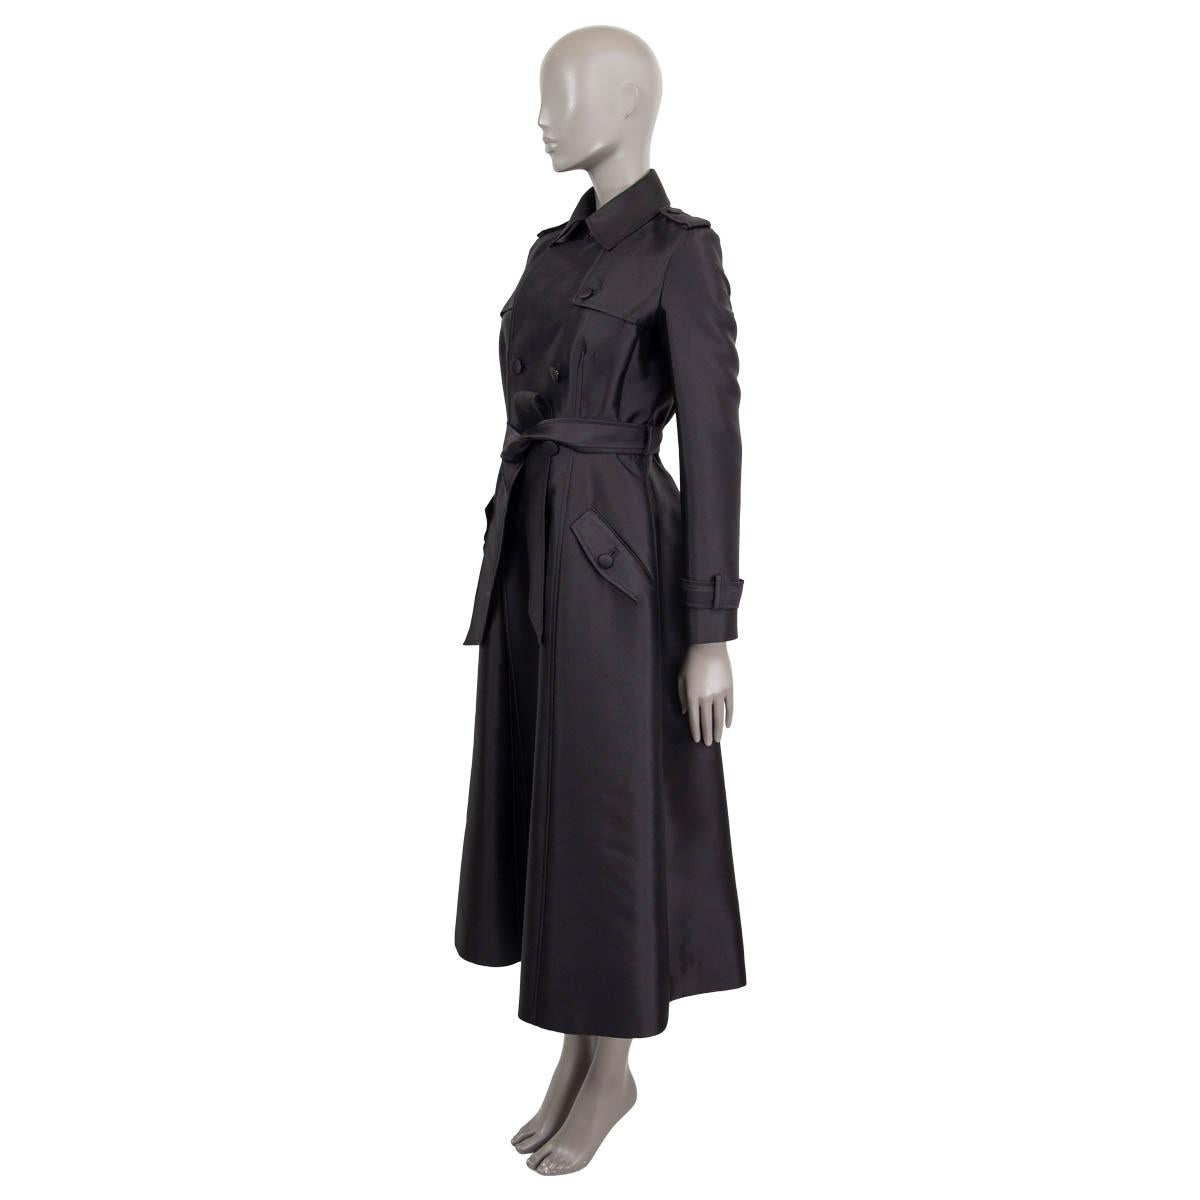 100% authentic Gabriela Hearst Cassatt long double breasted satin trench coat in black wool (57%) and silk (43%). Features epaulettes on the shoulders an buttons at the cuffs, has a self-tie belt and a flattering silhouette and with two pockets in